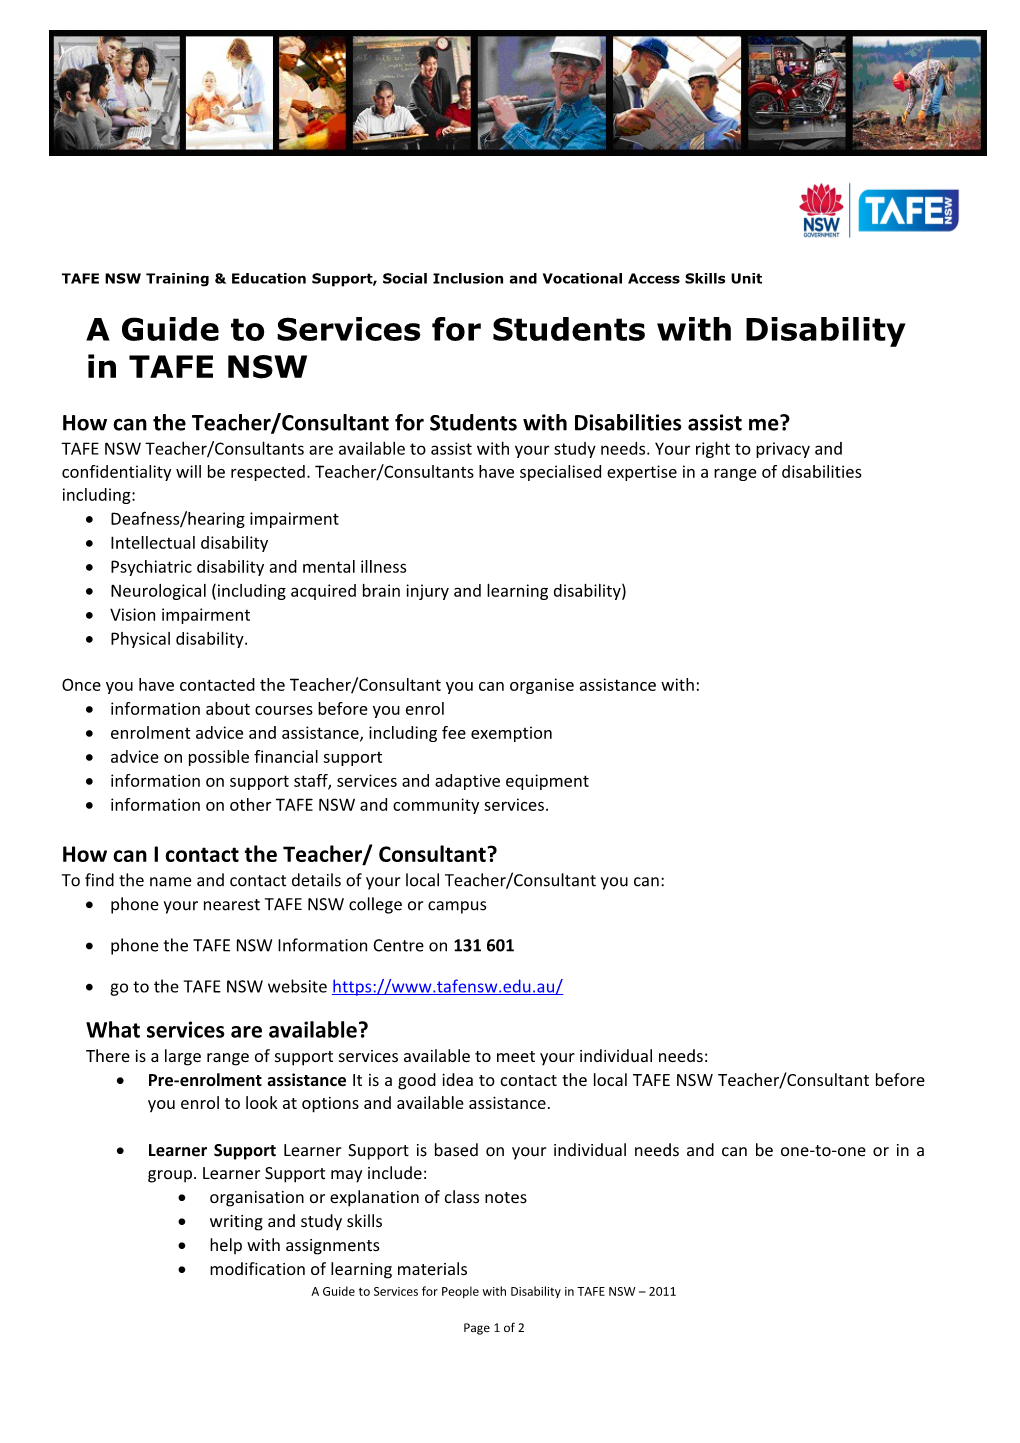 How Can the Teacher/Consultant for Students with Disabilities Assist Me?